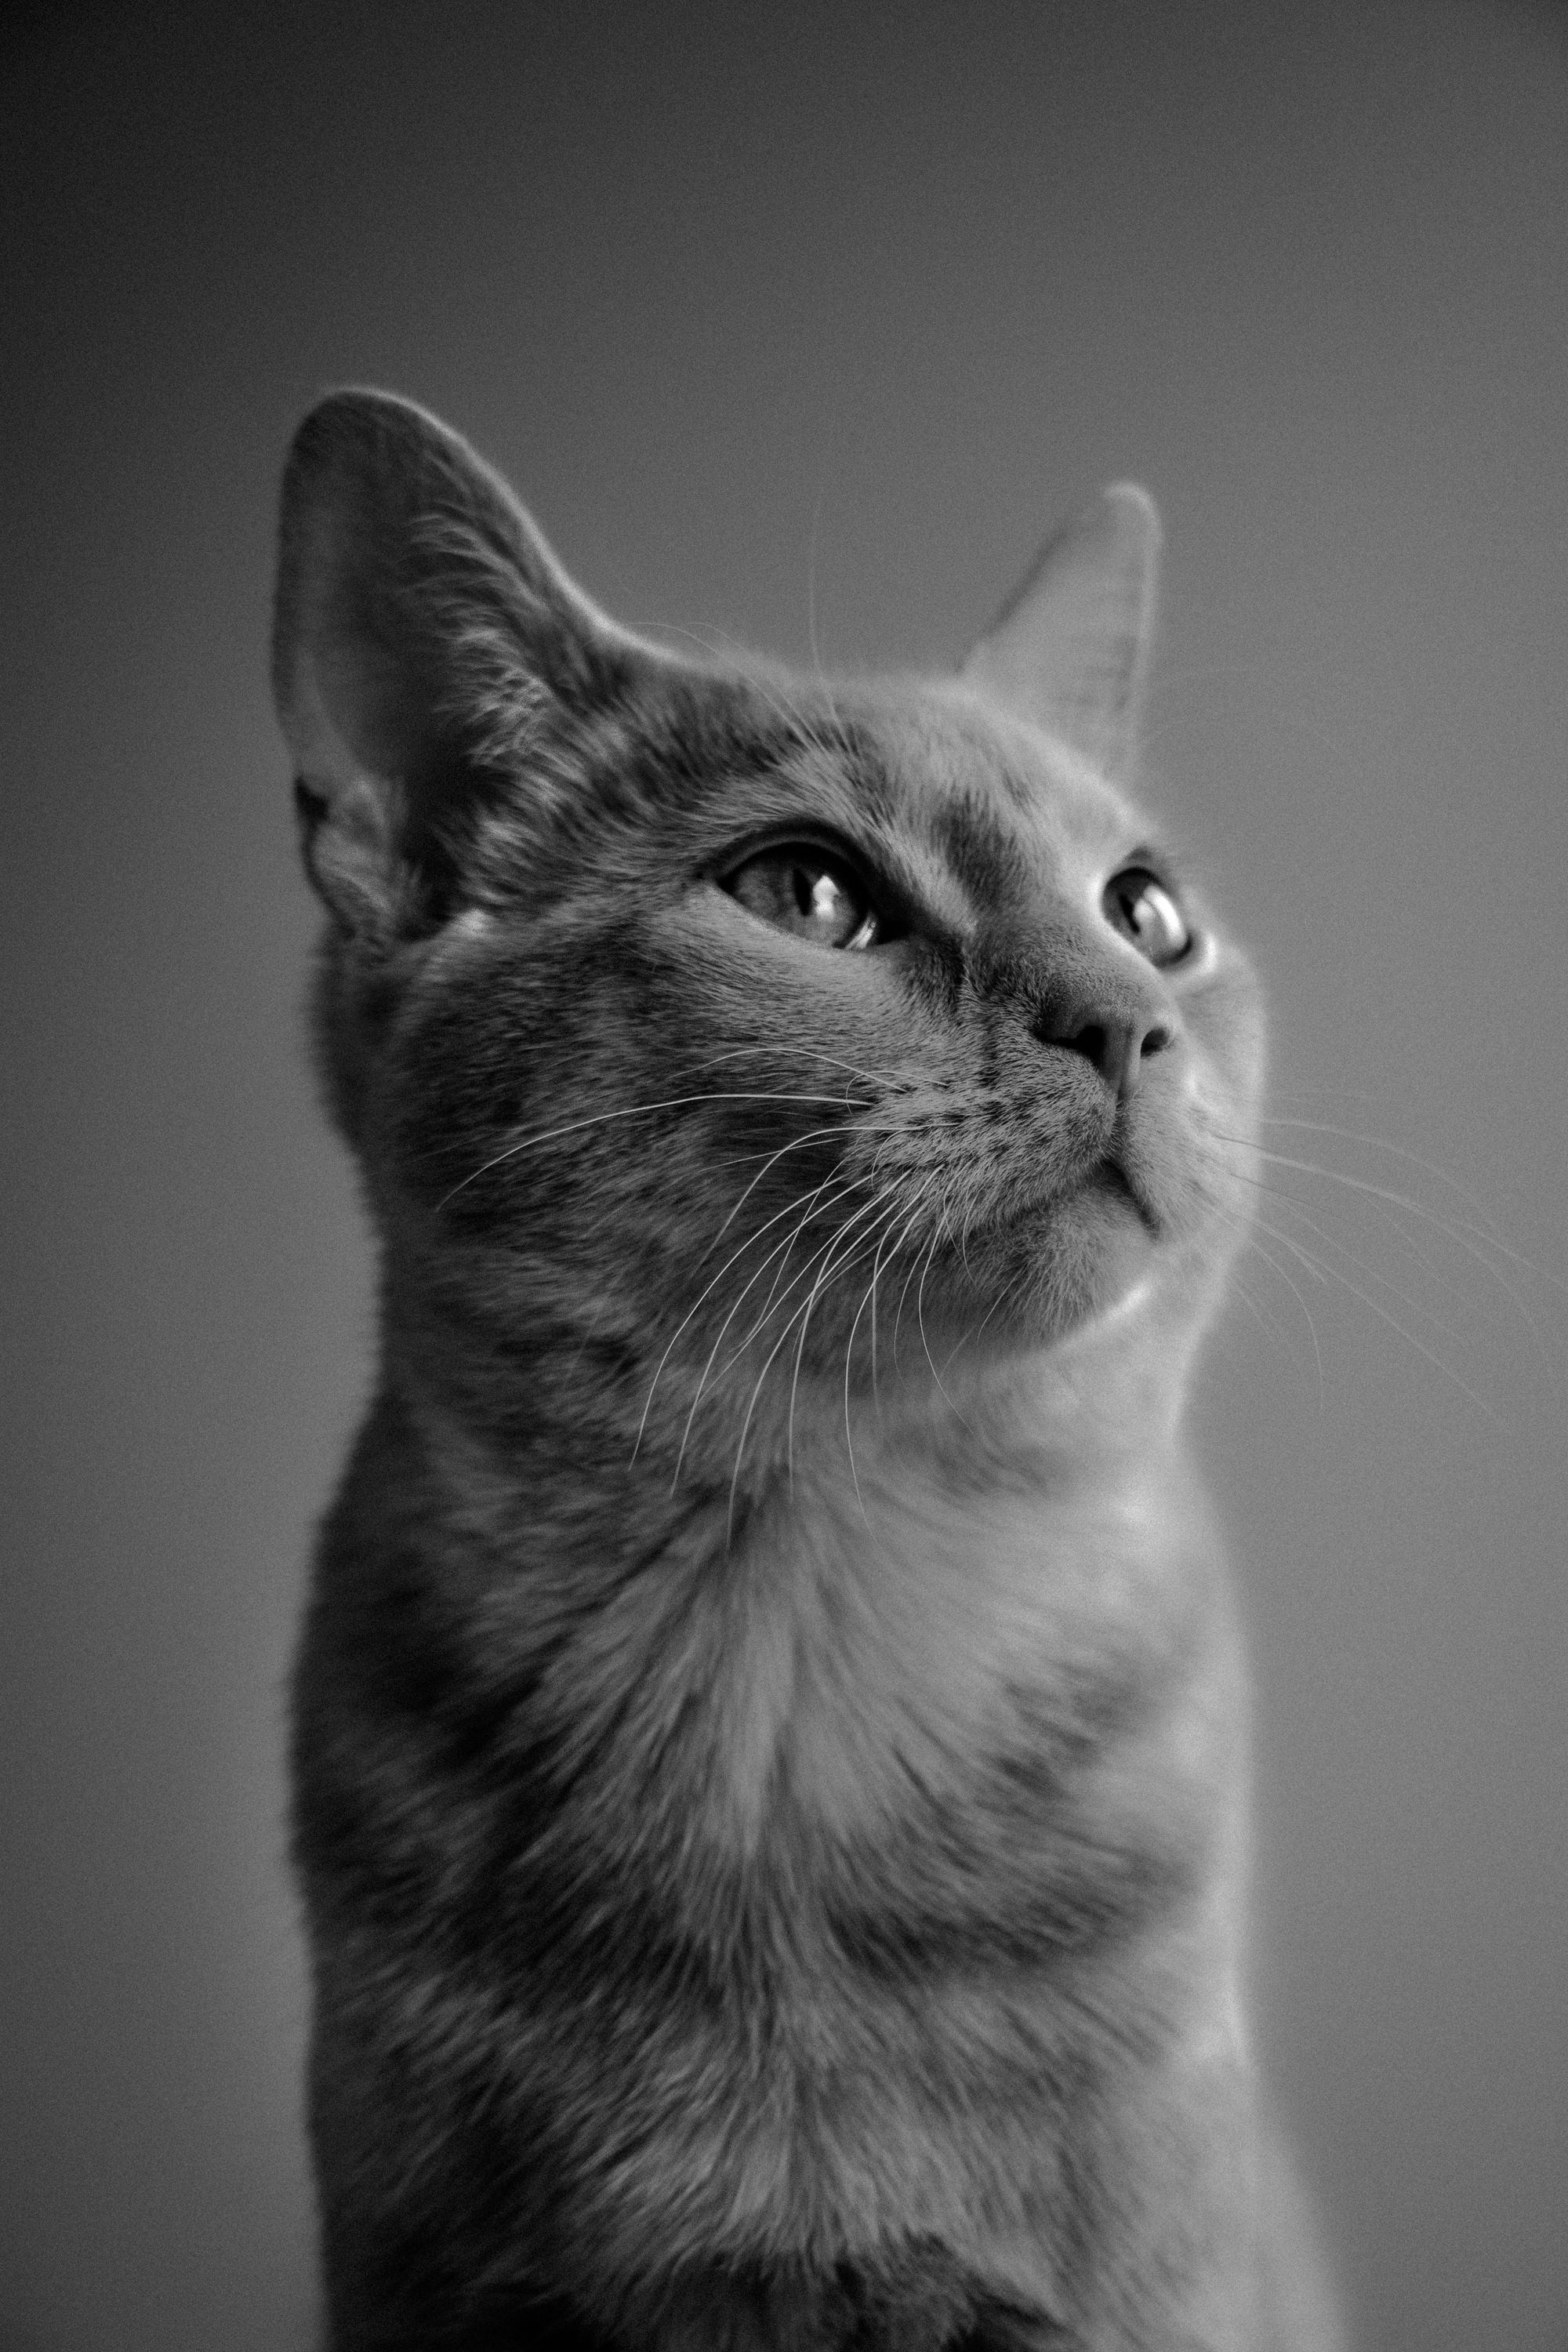 Cats can be the model for black and white portrait photography too!